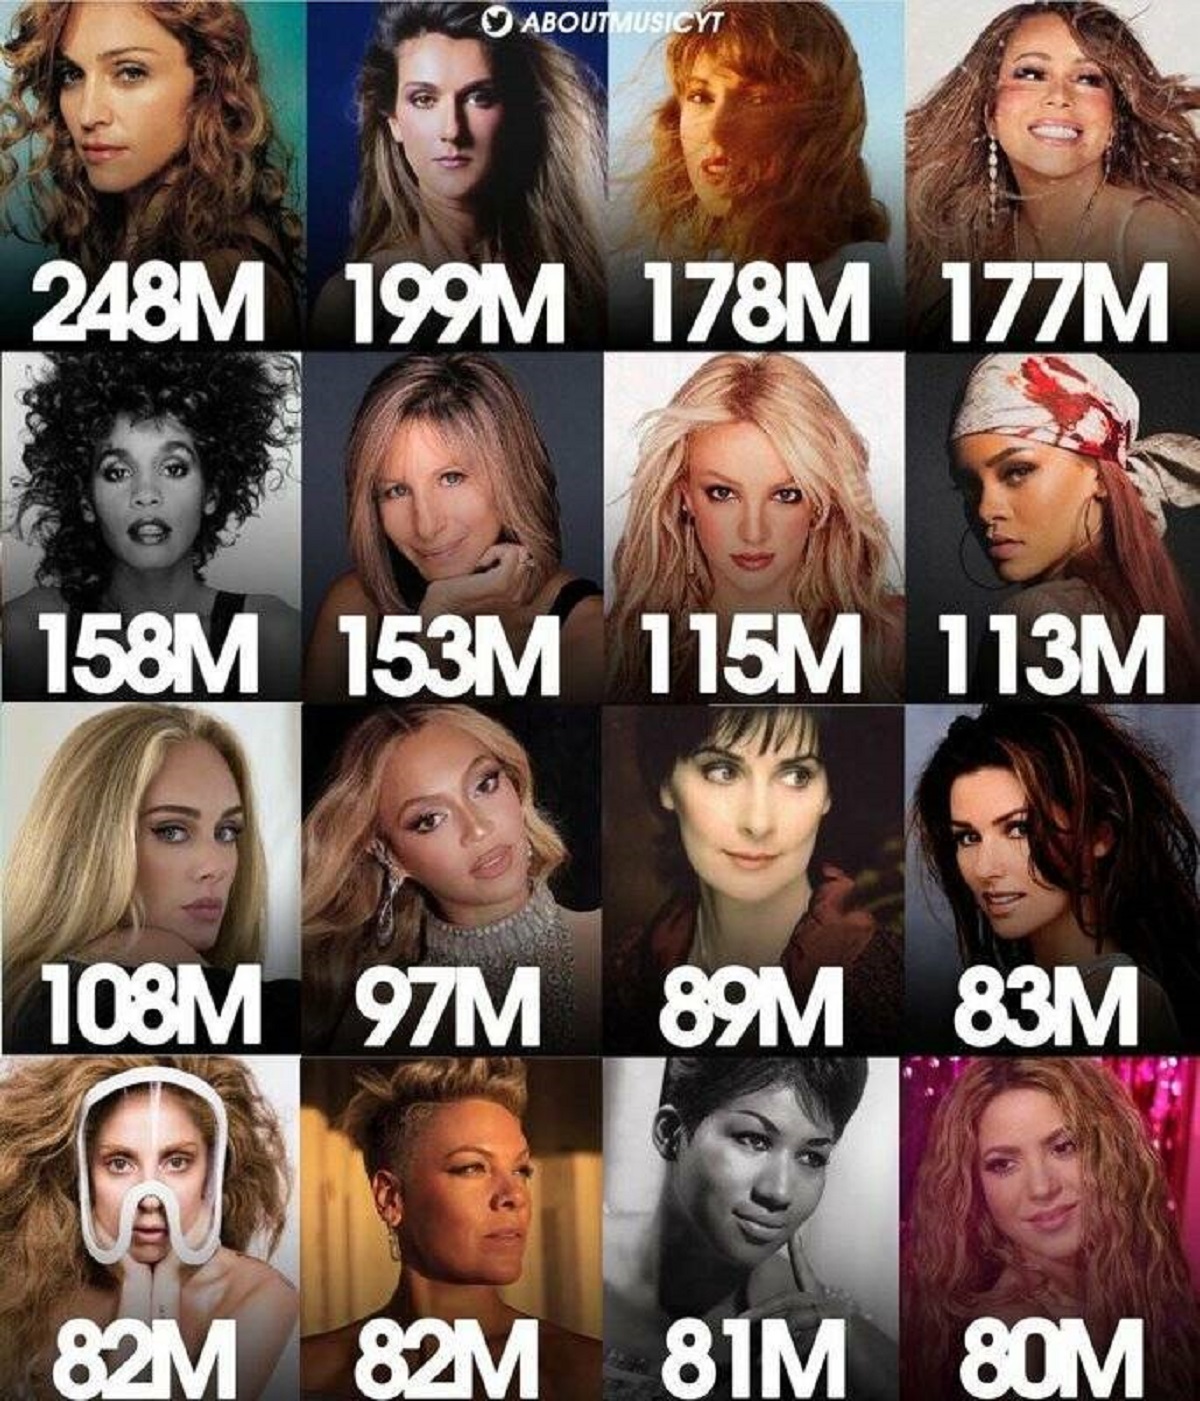 The Best Selling Female Artists of All-Time